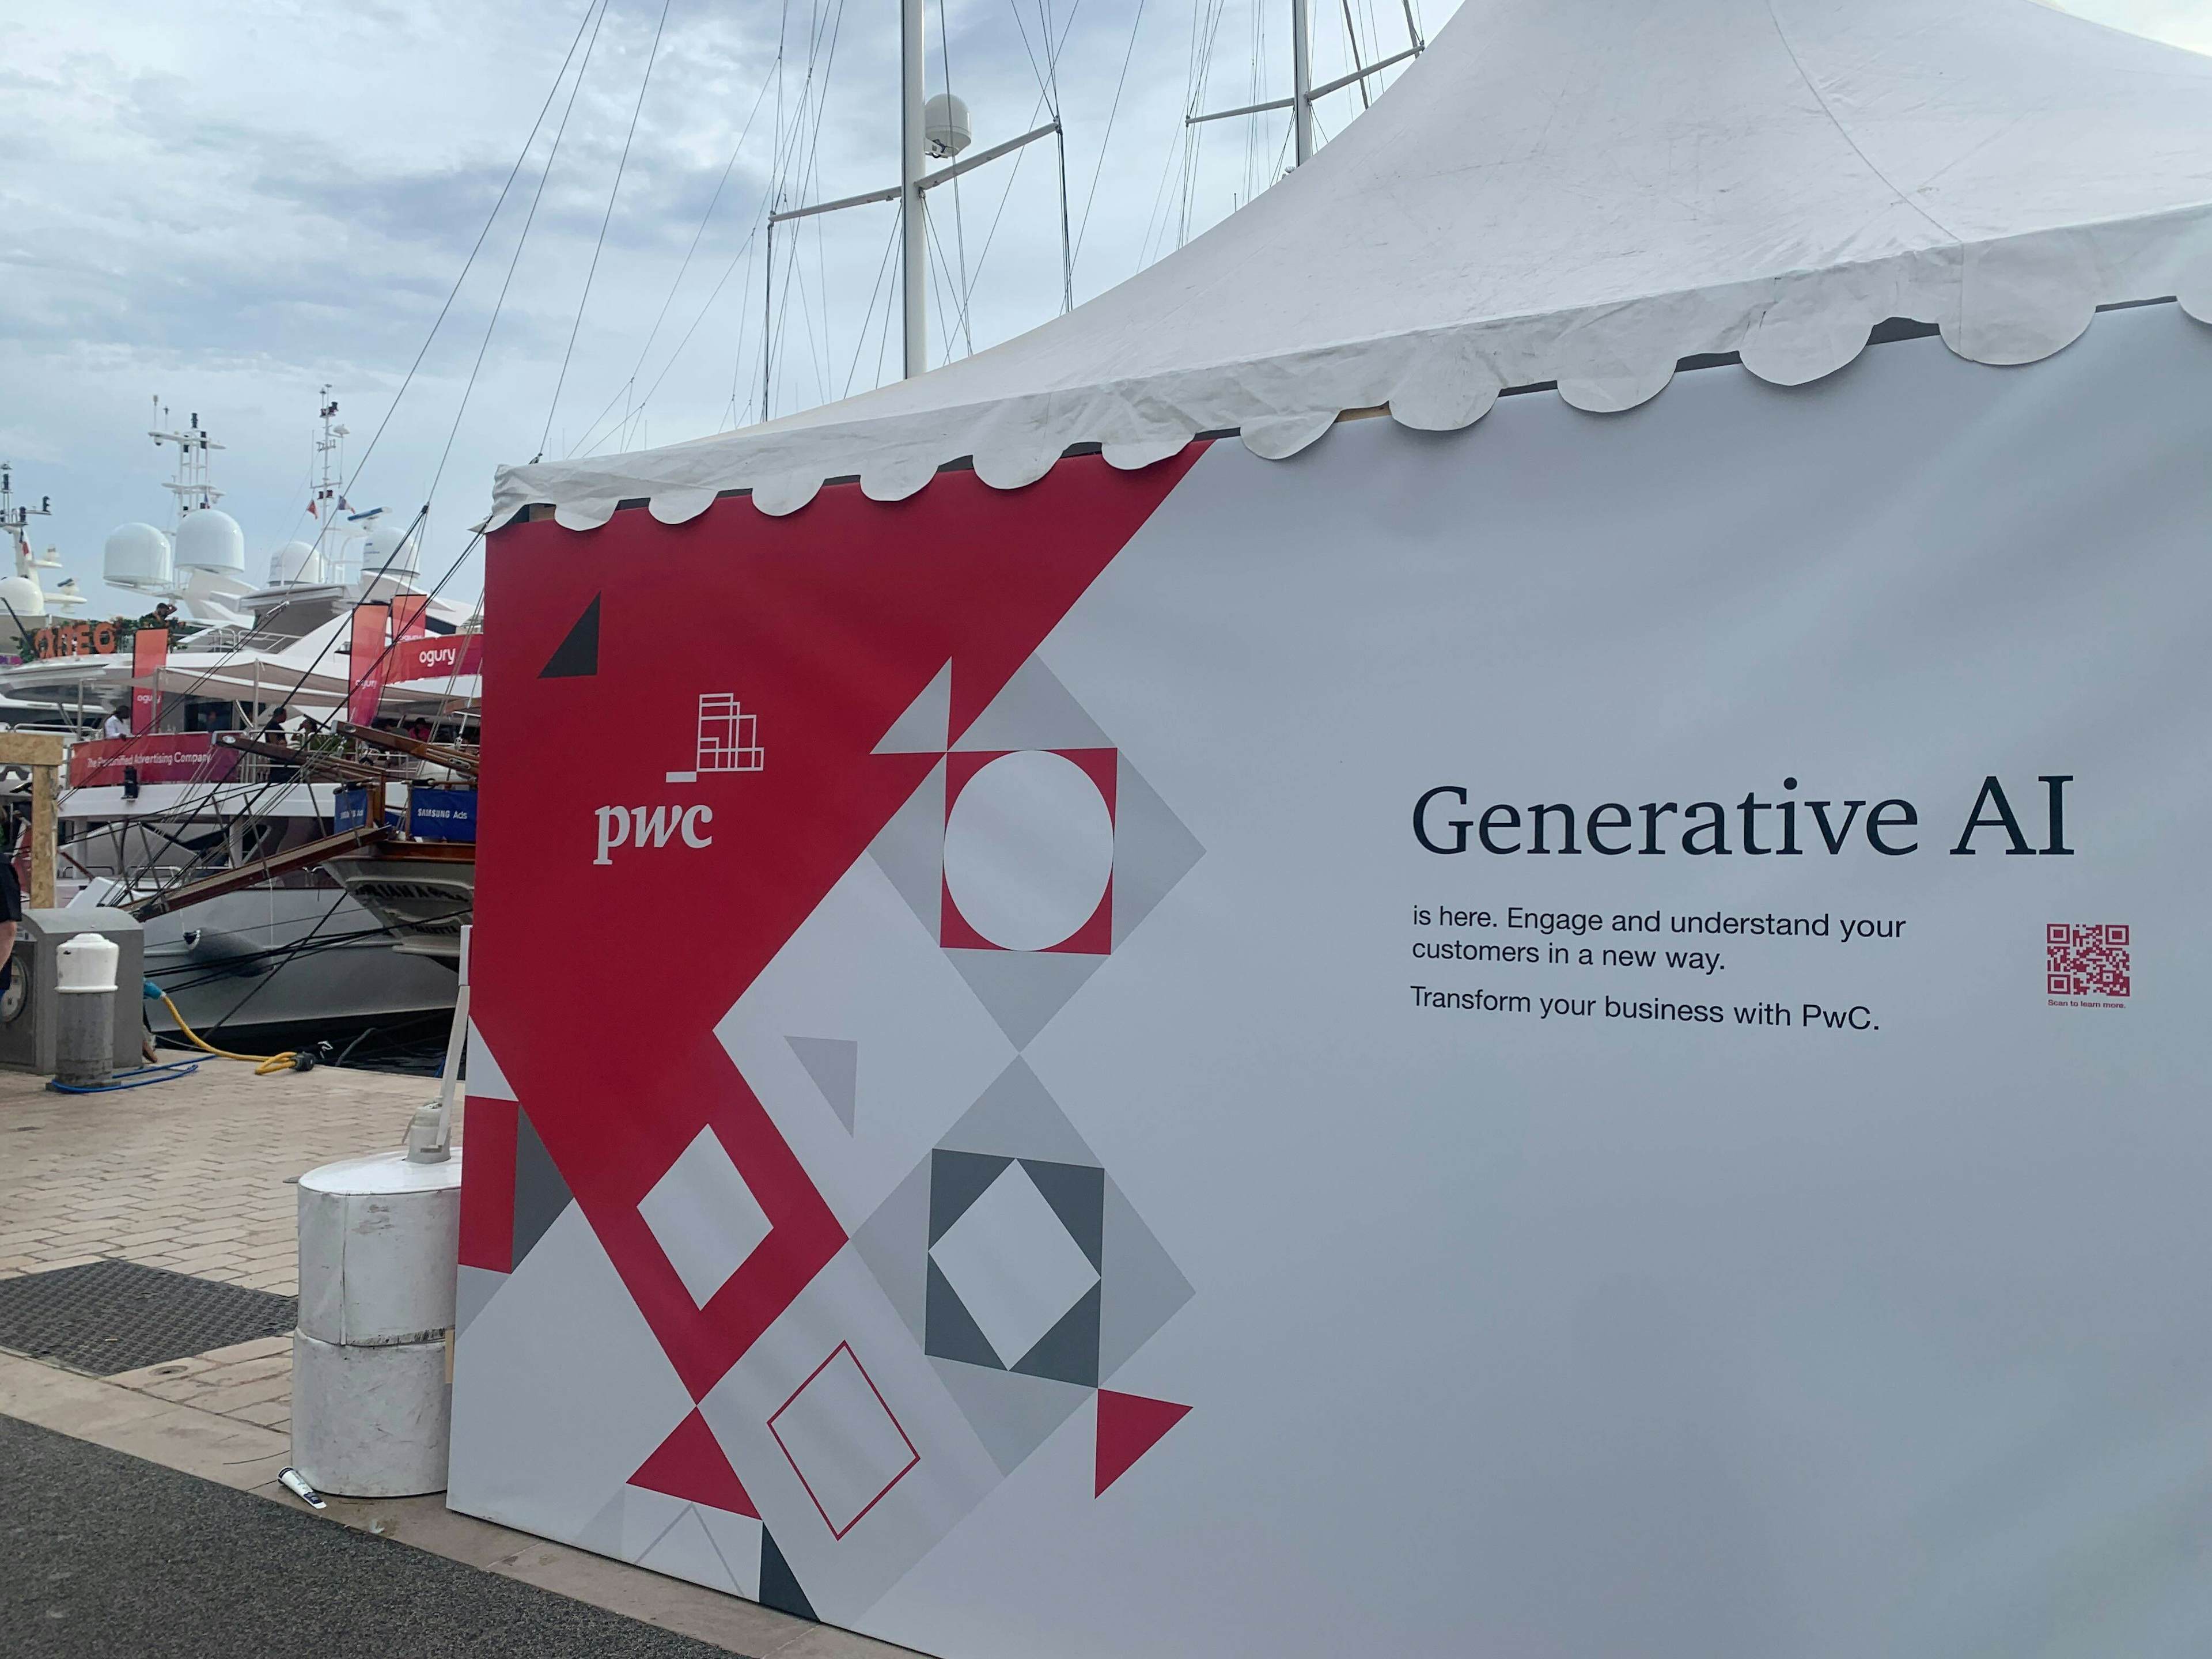 A branded tent for PwC reading "generative AI is here. Engage and understand your customers in a new way. Transform your business with PwC."